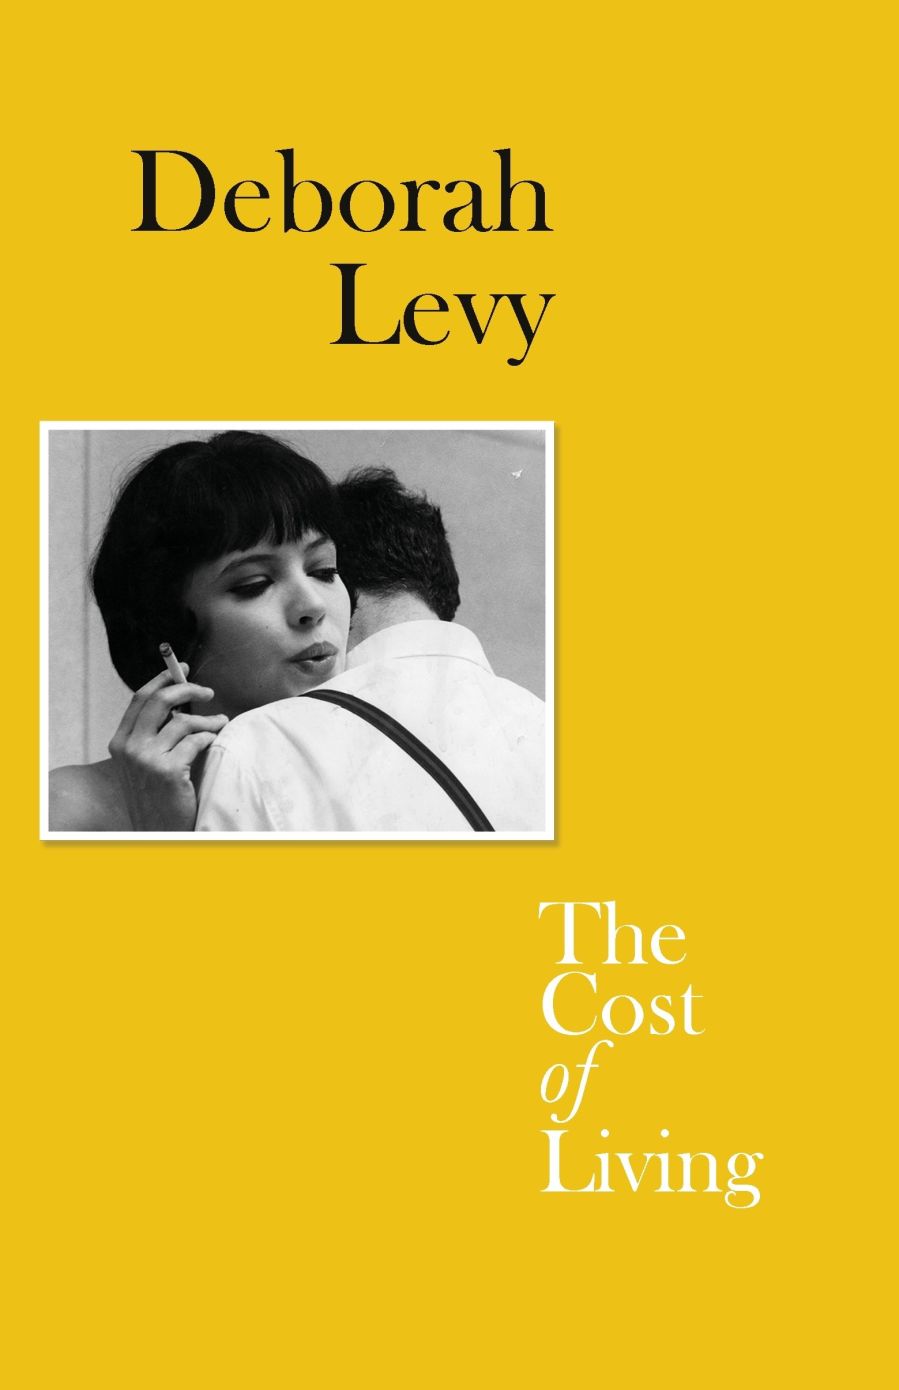 Yellow book cover of Deborah Levy's The Cost of Living.